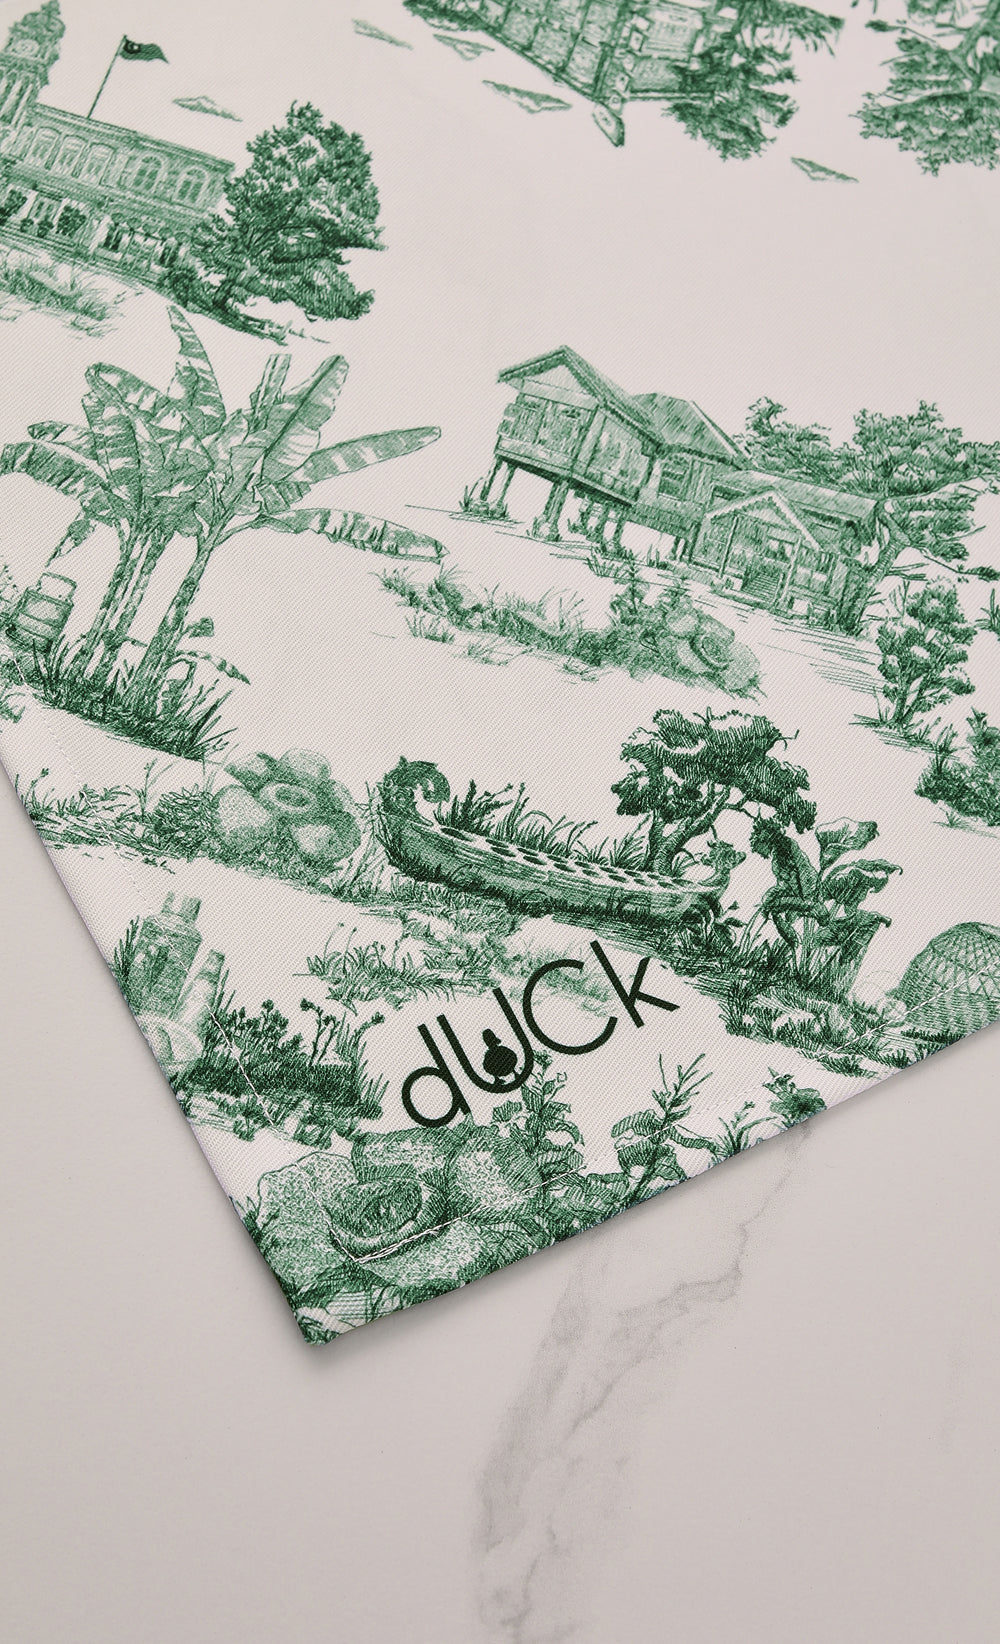 The Malaysia dUCk Placemats